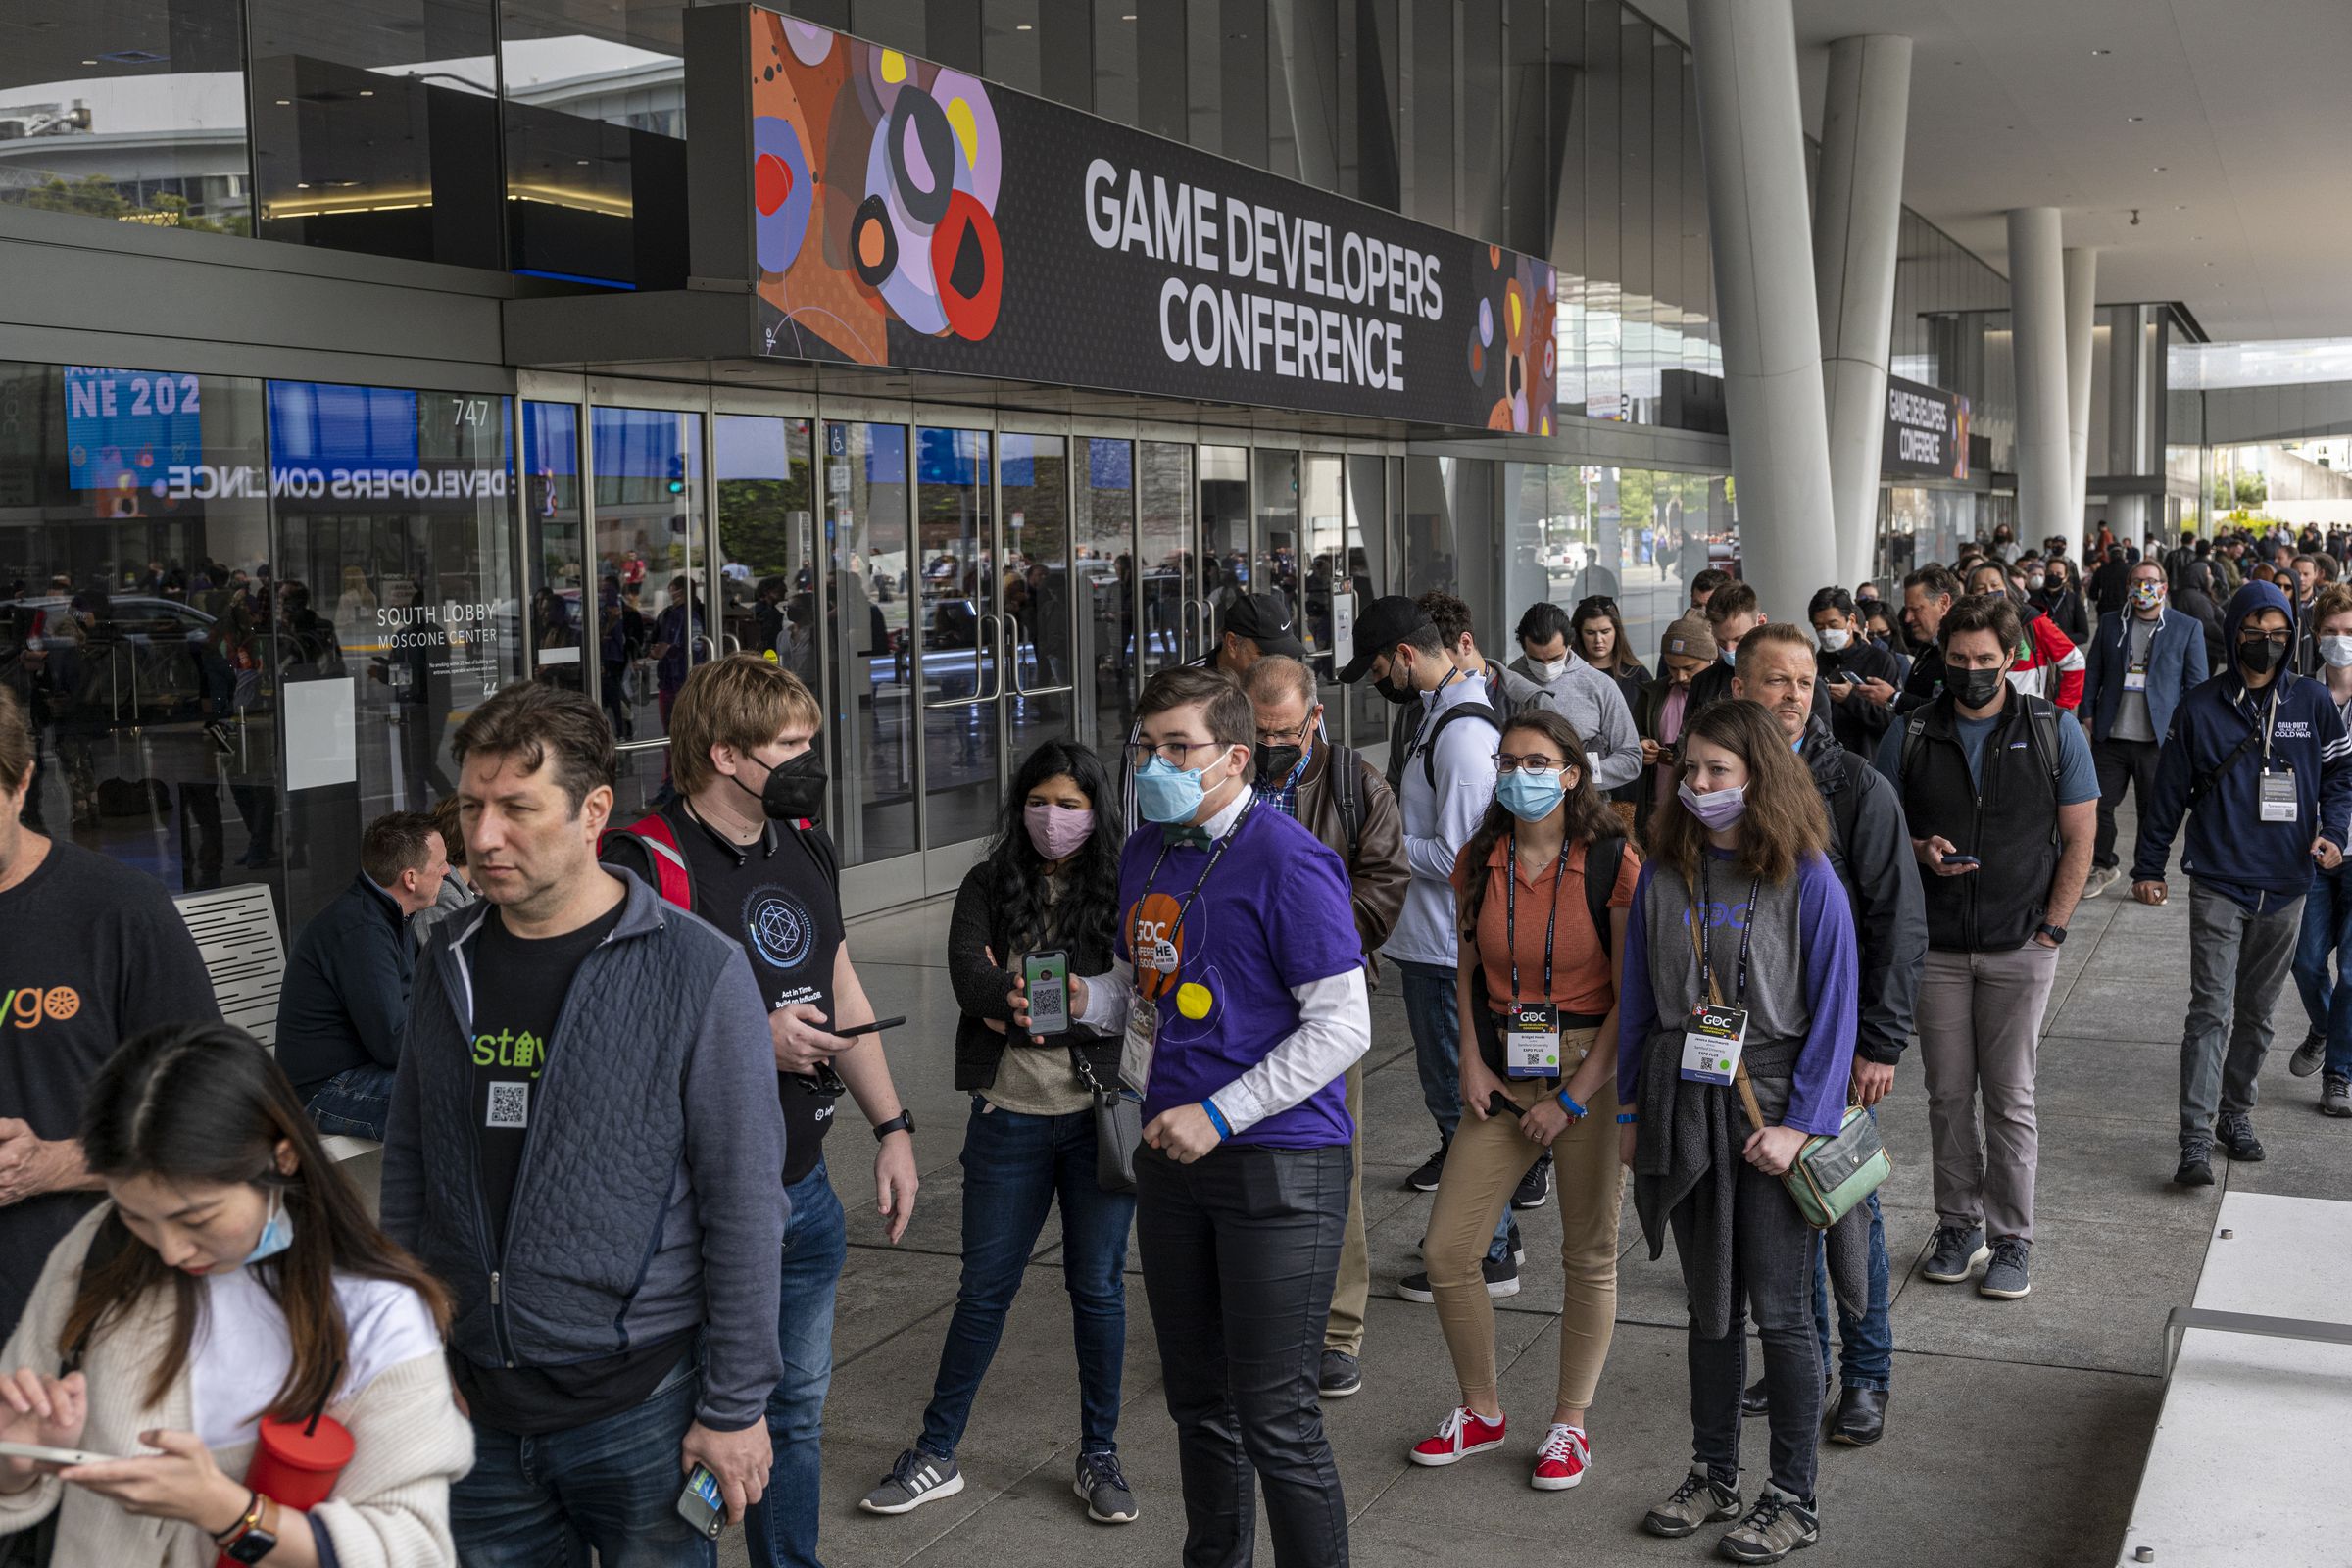 Inside The Game Developers Conference